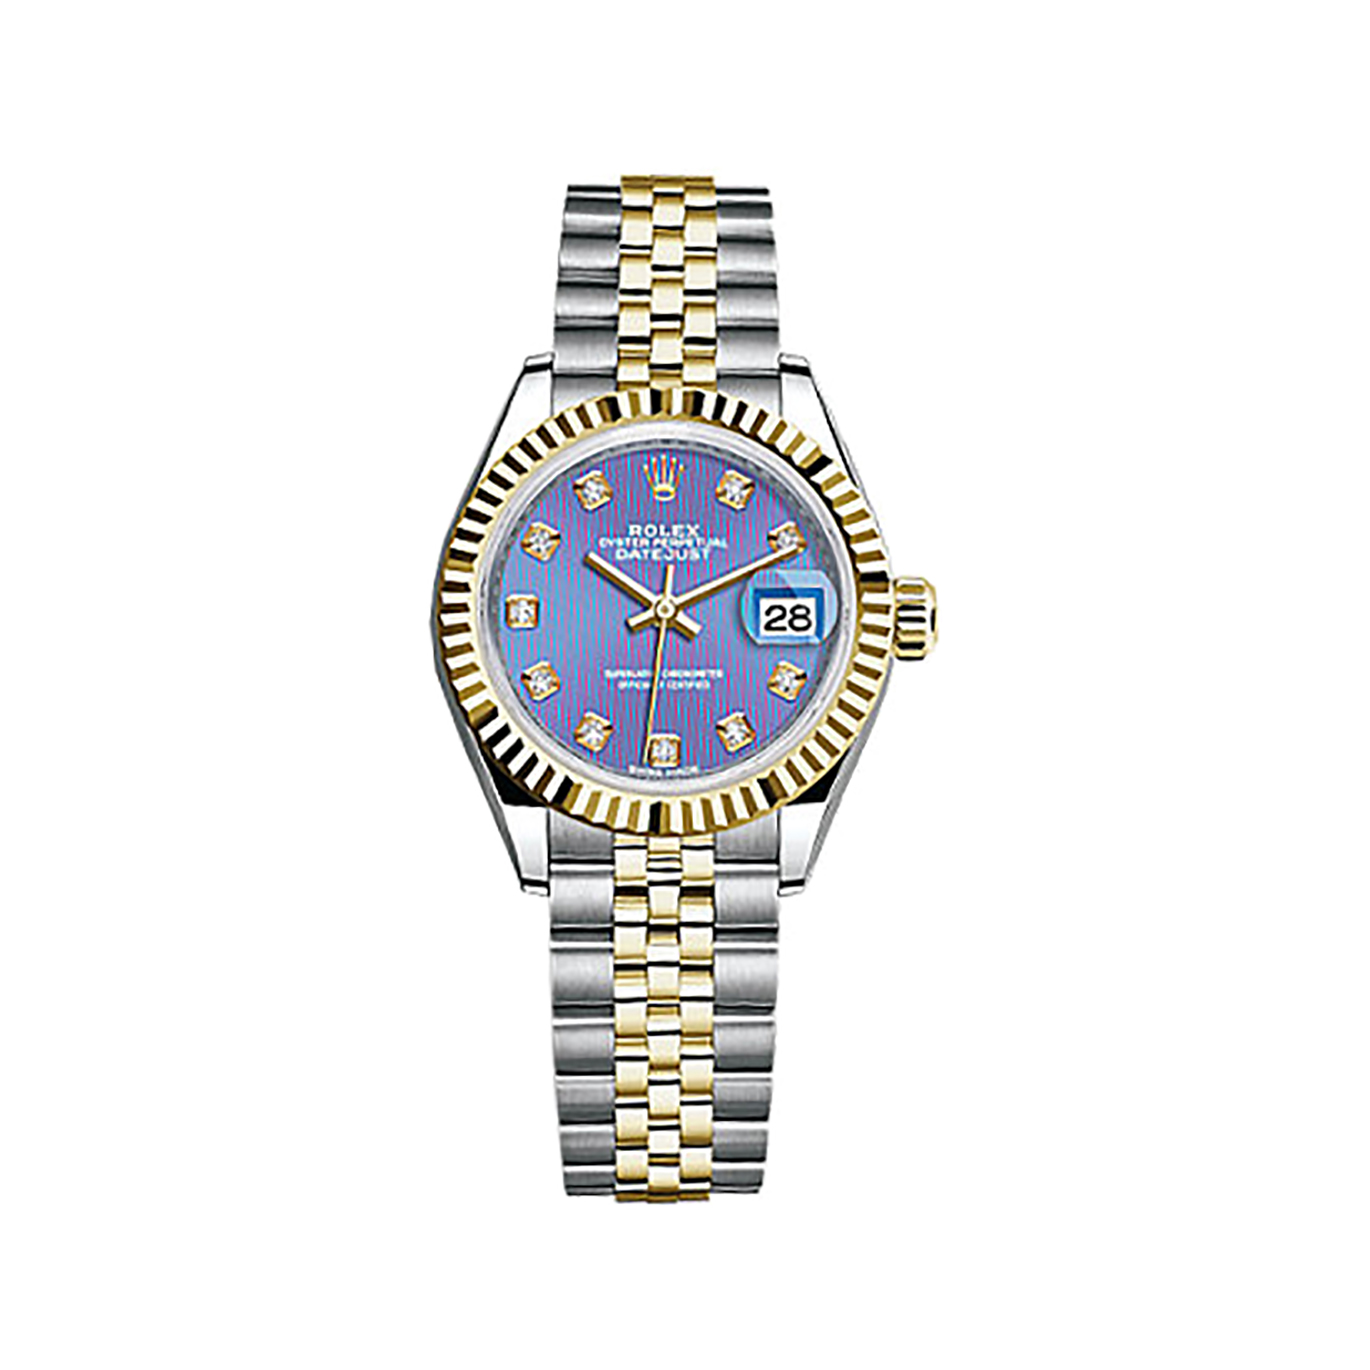 Lady-Datejust 28 279173 Gold & Stainless Steel Watch (Lavender Set with Diamonds)